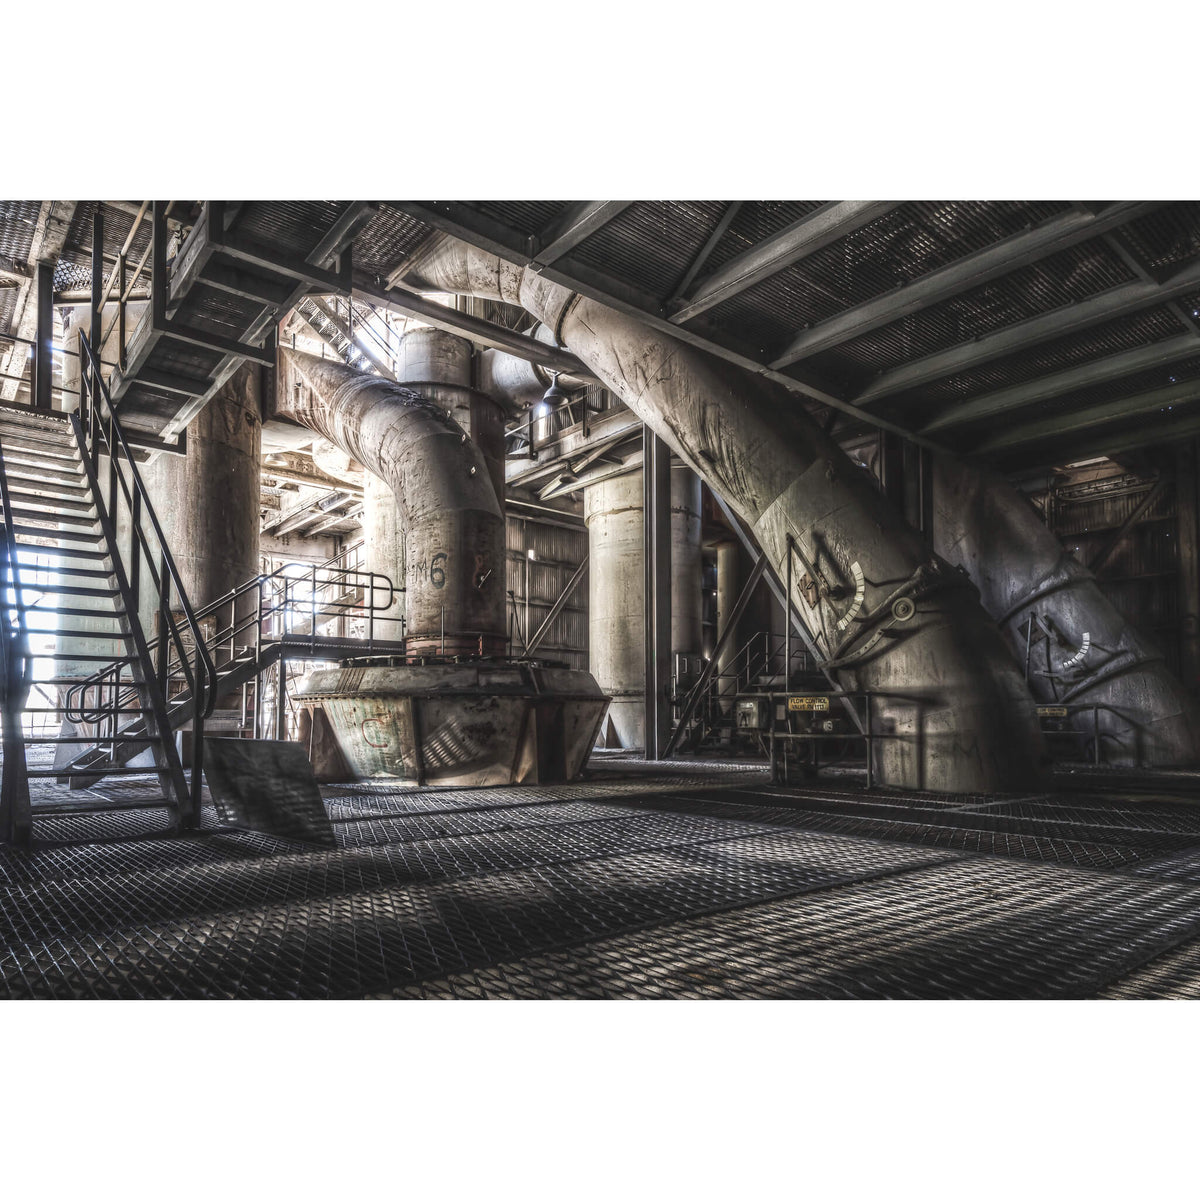 Cyclonic Separator | Kandos Cement Works Fine Art Print - Lost Collective Shop